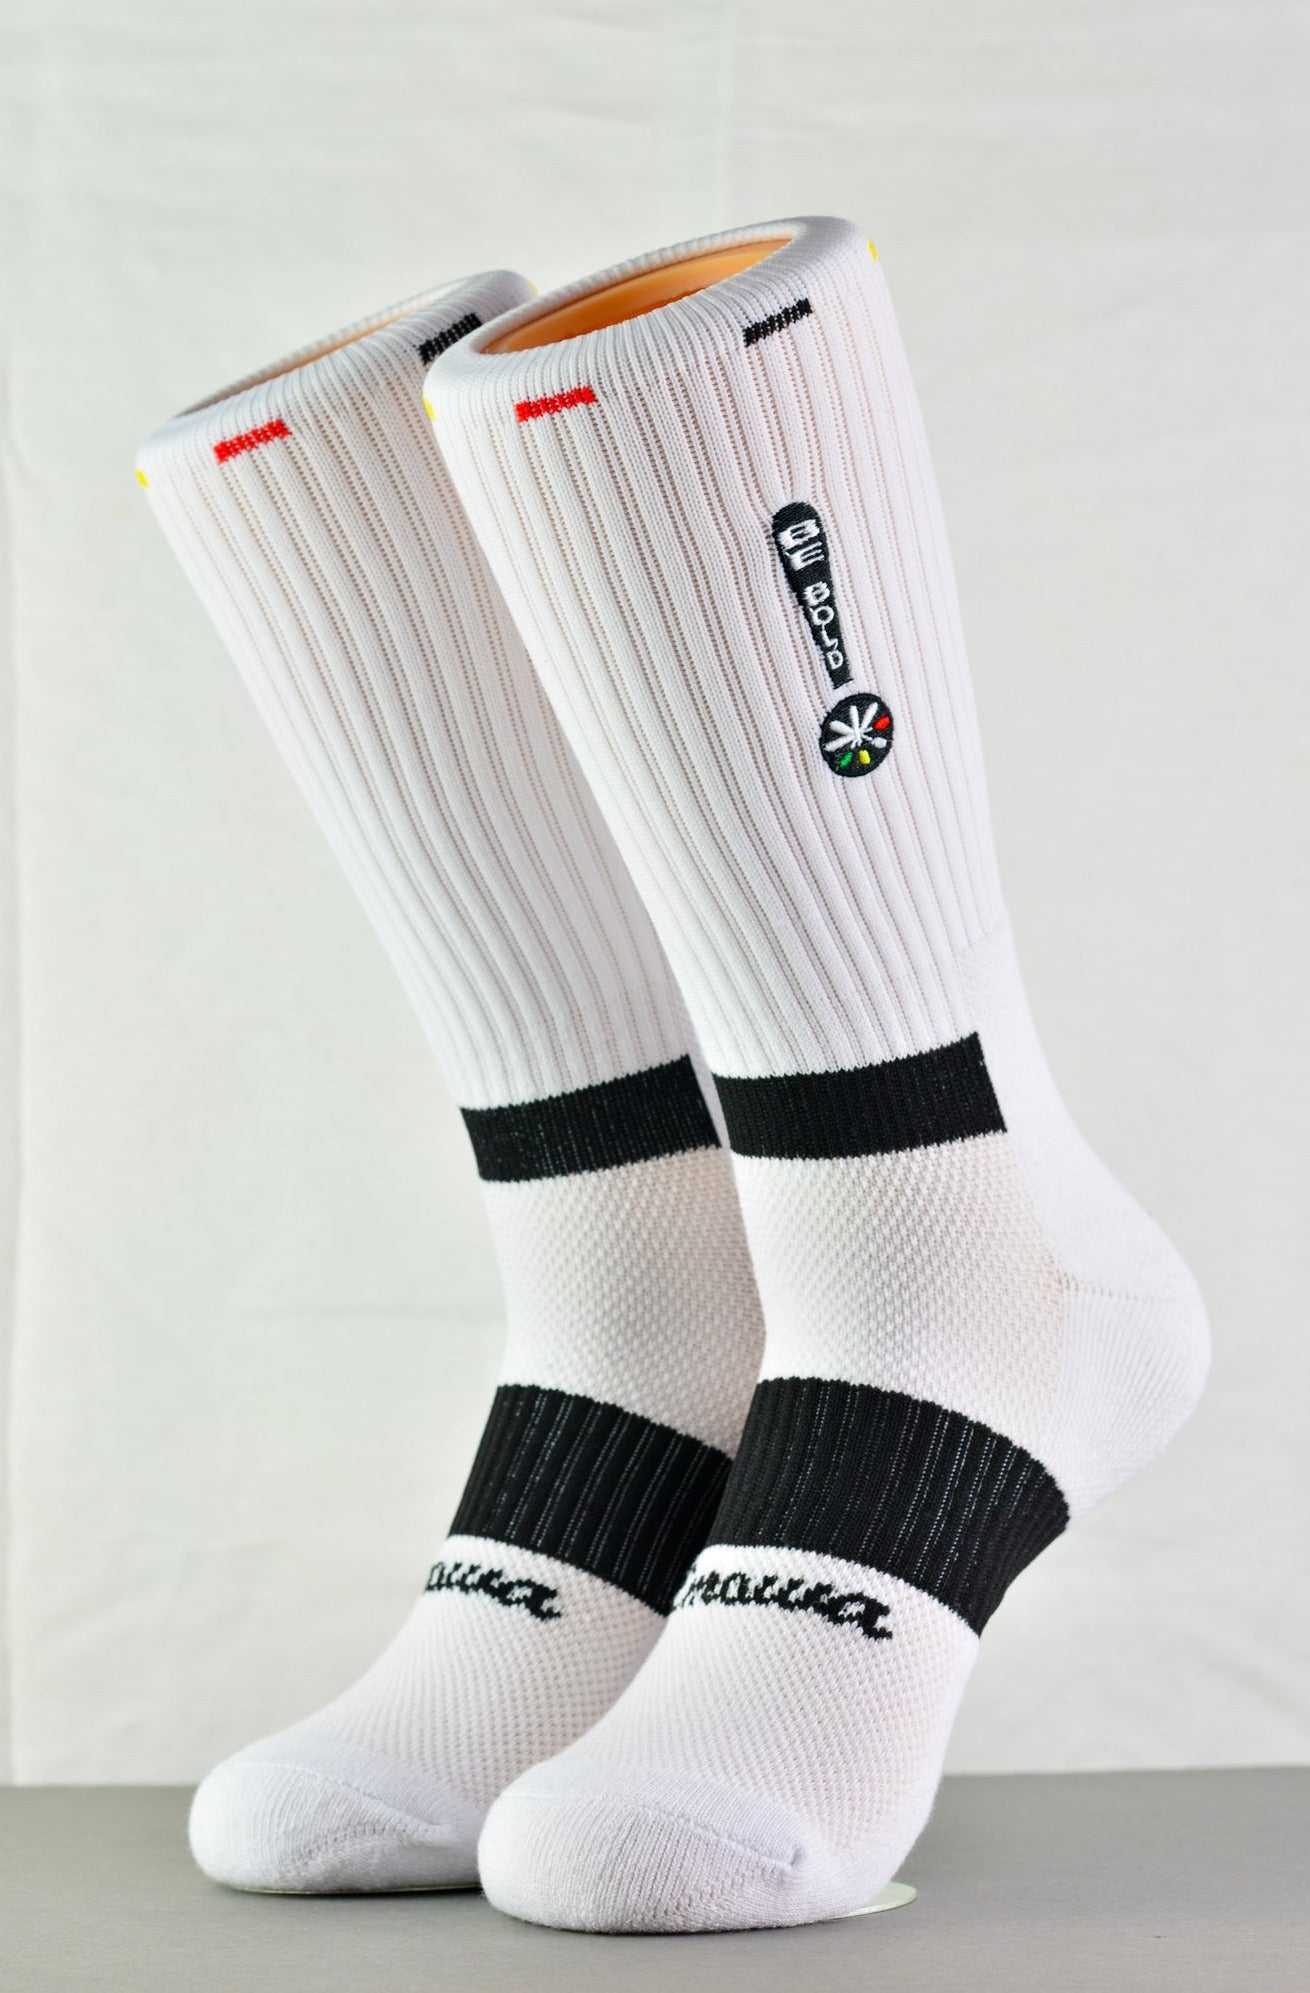 Emowa performance socks are designed to unleash your athletic side. With compression-like fitting and a seamless toe design, our moisture-wicking socks are ideal for whatever active lifestyle you’re into.